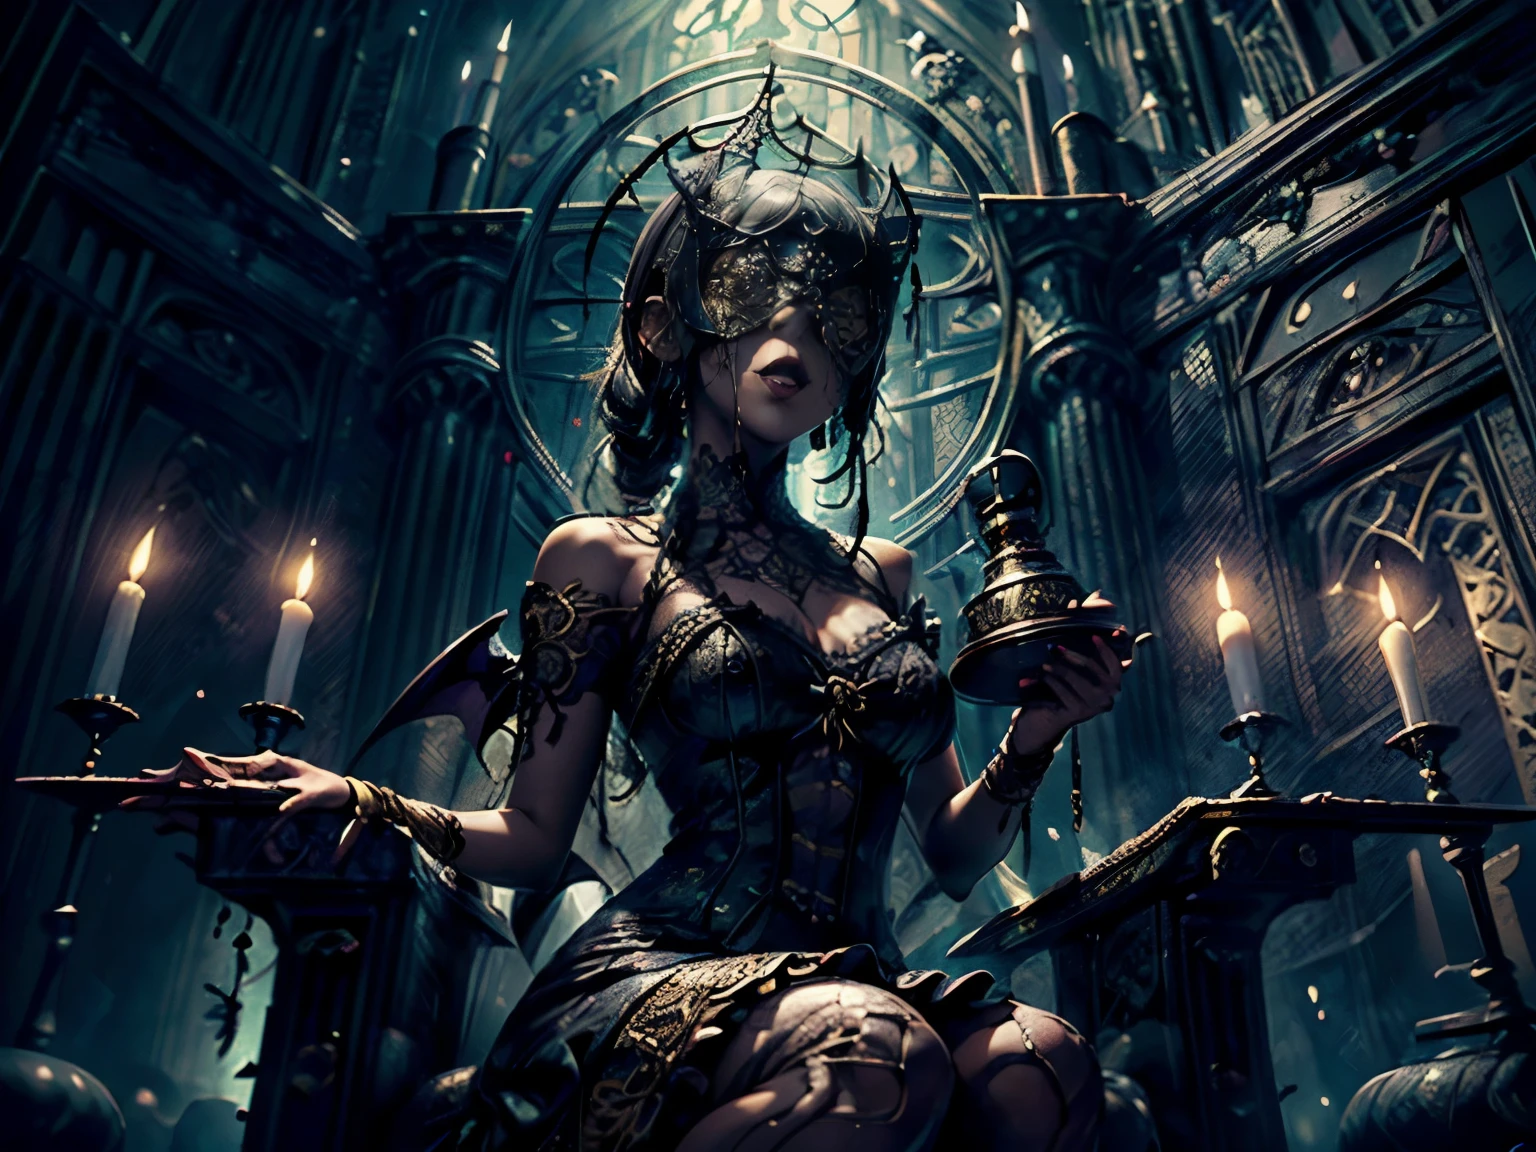 ((dark-skinned Caribbean 1girl wearing blindmask with long indigo freeform braided hair, sitting in gothicpunkai throne, wearing tight sensual gothic lolita style dress with intricate lace patterning and leather straps and bindings, dark two-tone lipstick, open mouth tongue out expression, ornate golden chalice in hand)), Ultra-realistic 8K CG, ((ultra-detailed background is abandoned cathedral with iron-wrought candelabra and tarnished sculptures, delicate pattern, intricate details, many bats ravens and owls flying throughout scene)), best quality, intricate details, solo, (masterpiece:1.6, best quality), (masterpiece, best quality:1.2), 8k, insane details, intricate details, hyperdetailed, hyper quality, high detail, ultra detailed, professional, HDR, realistic, ray tracing reflection, cinematic lighting, ornate,